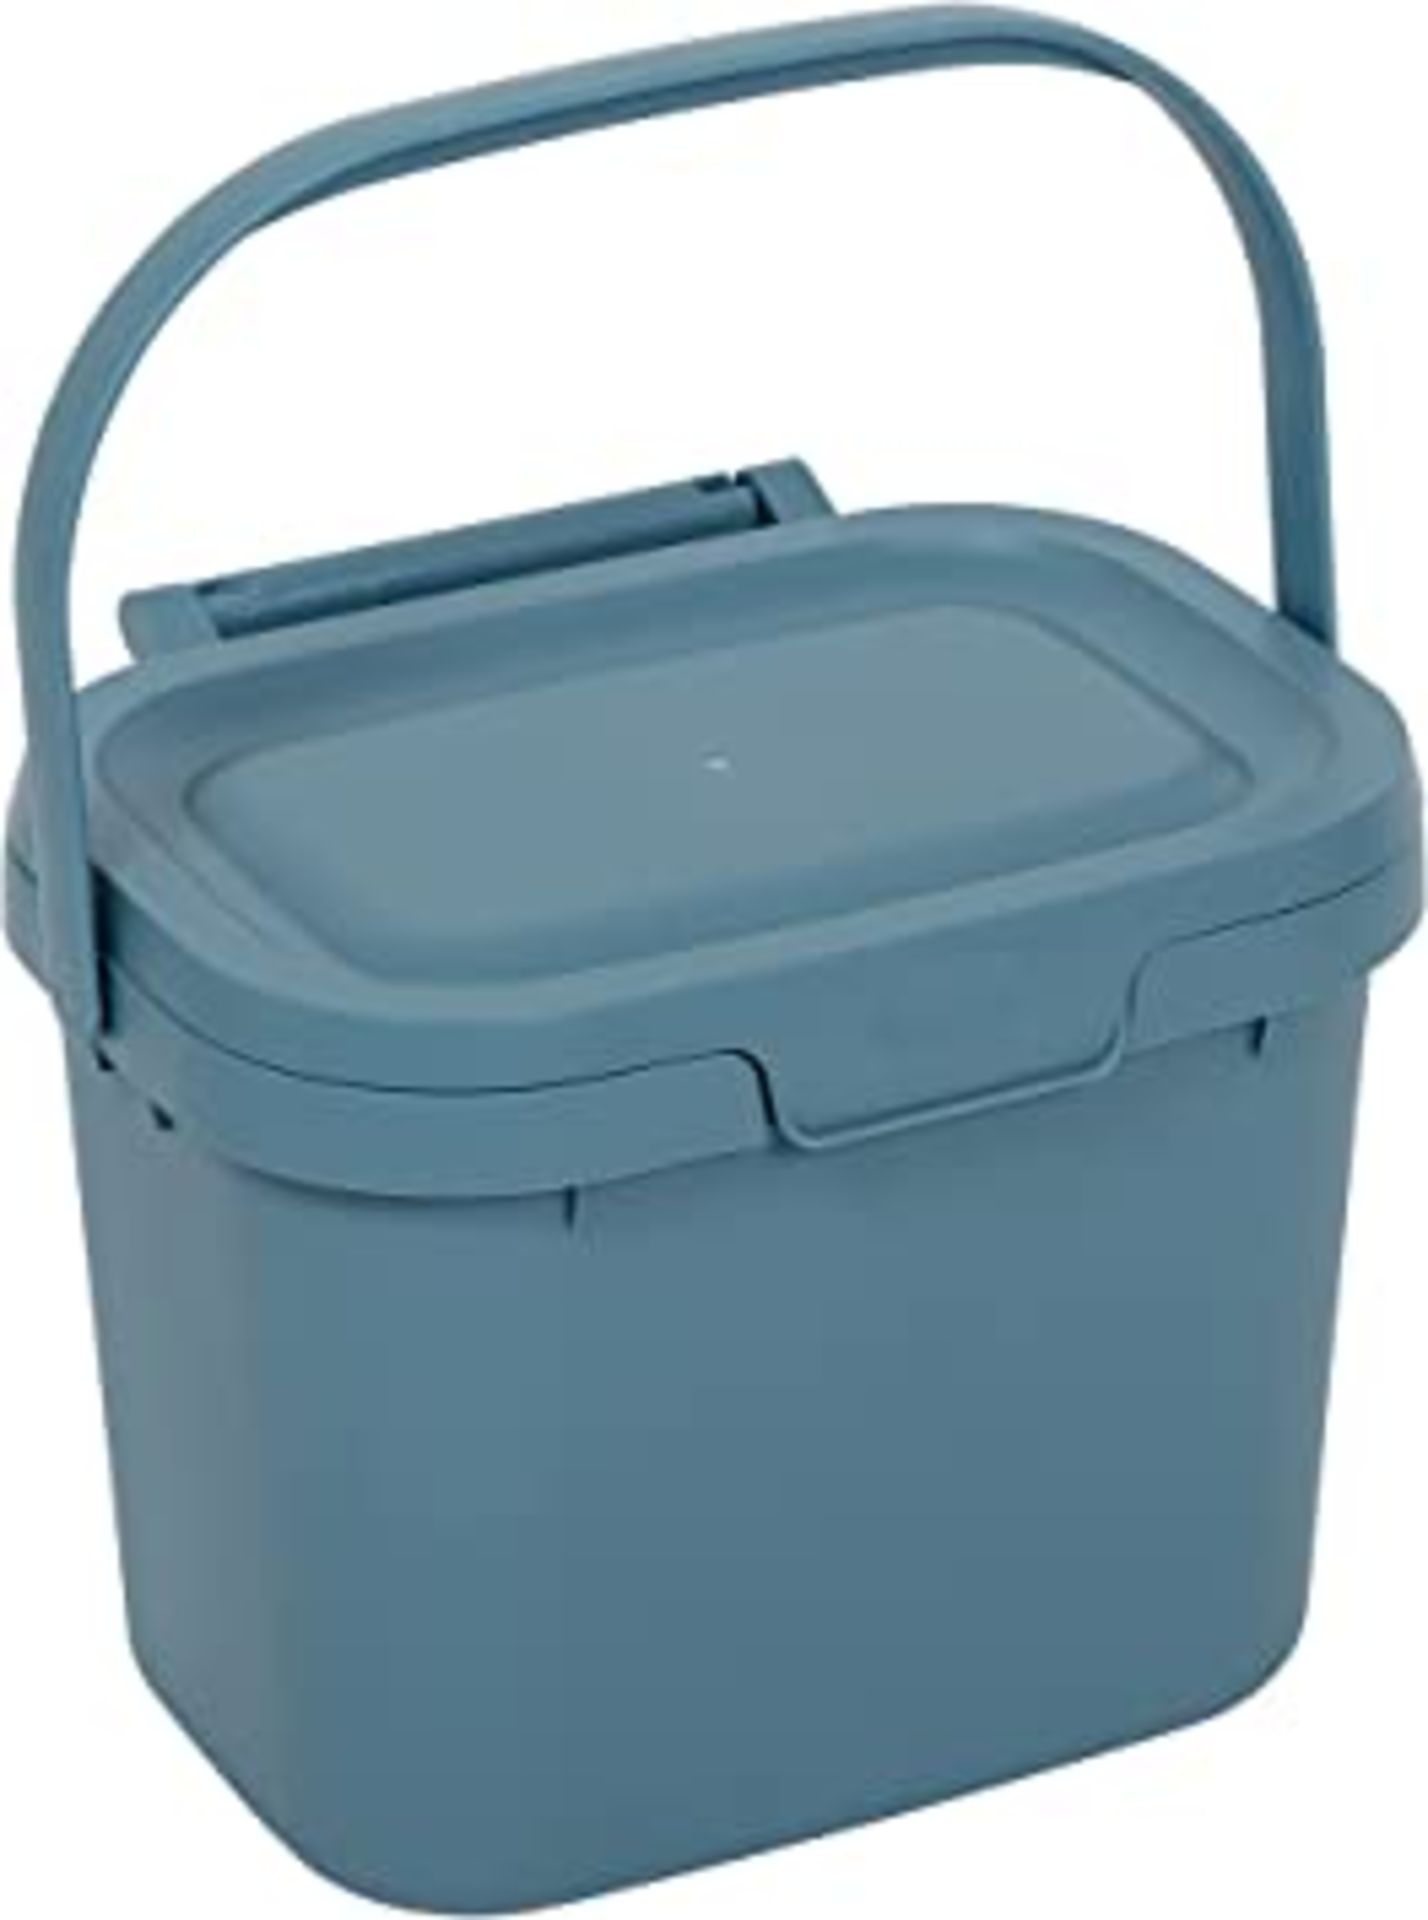 RRP-£6 Addis Everyday Kitchen Food Waste Compost Caddy Bin, 4.5 Litre, Air Blue, 518696